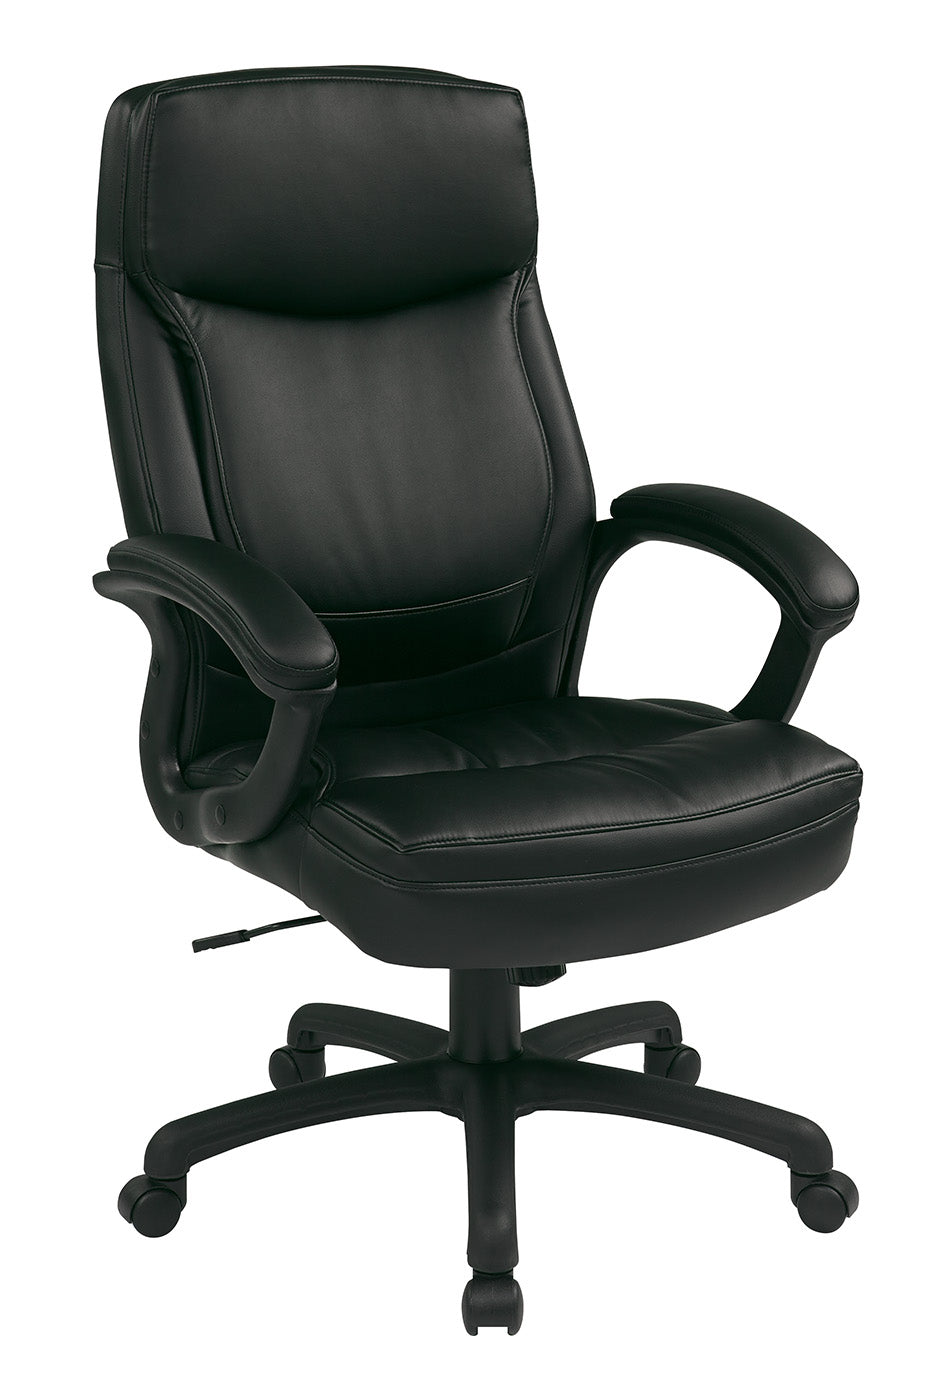 EC6583 - Executive High Back Eco Leather Chair by Office Star